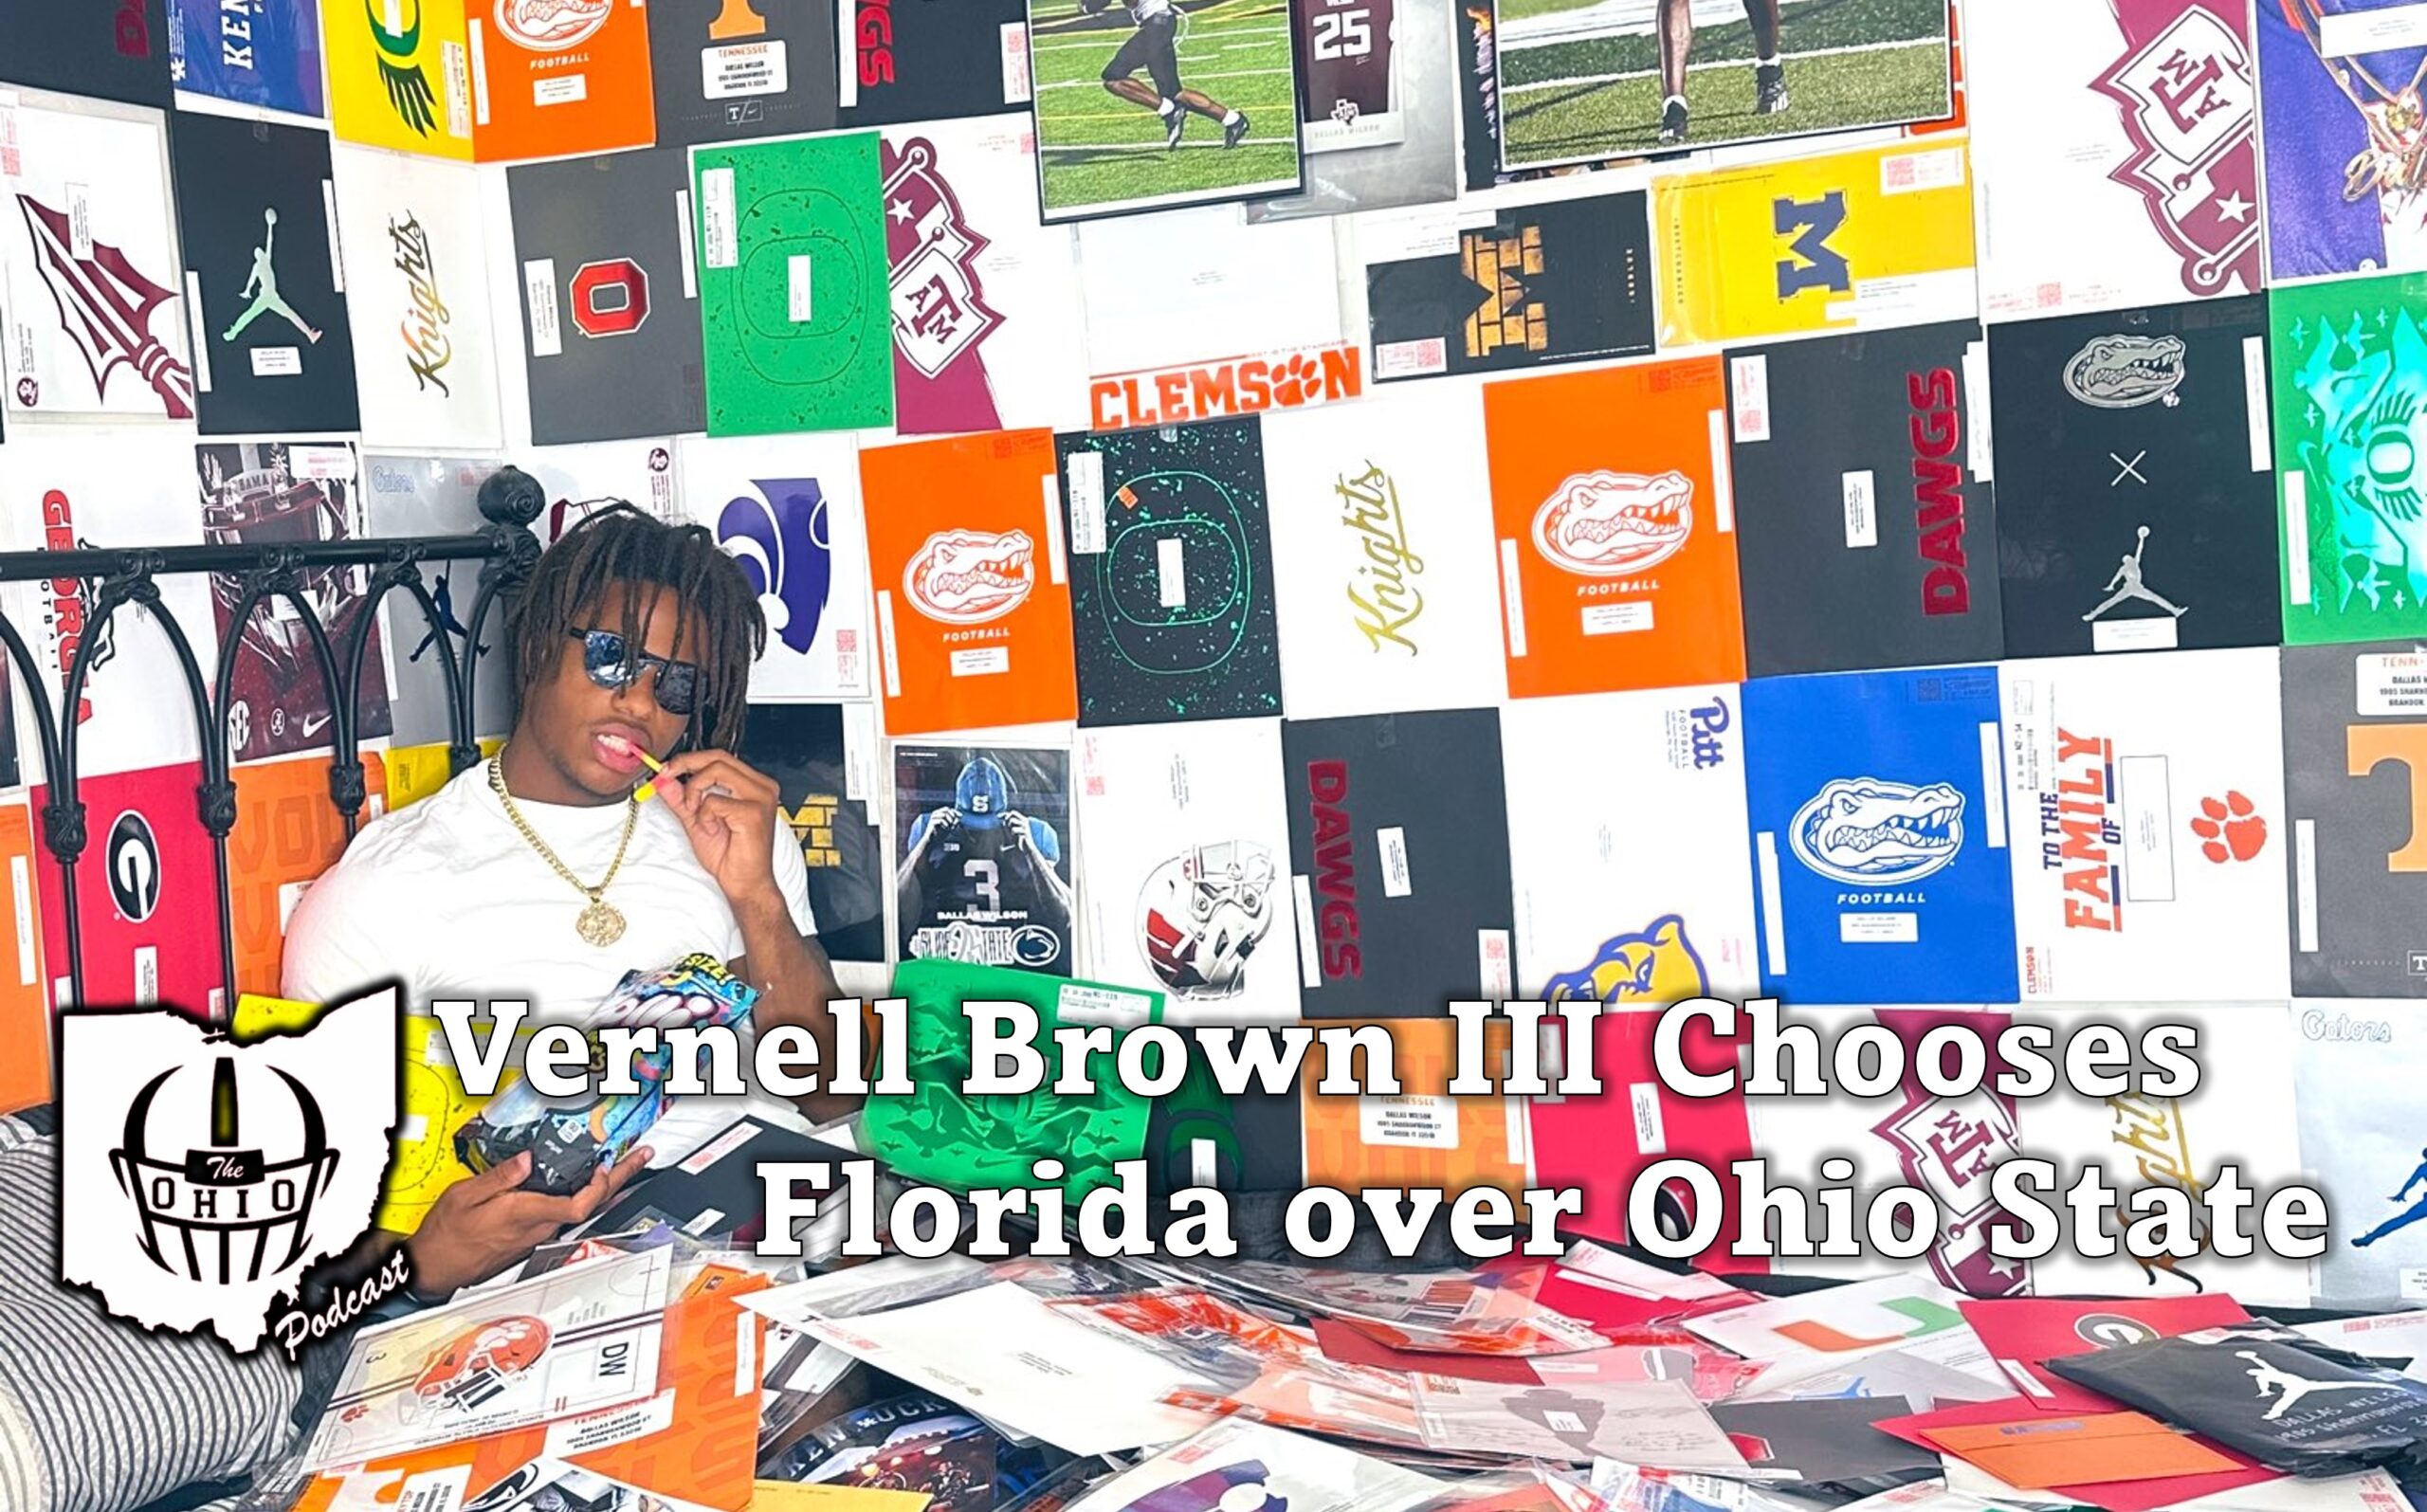 Vernell Brown III Chooses Florida Over Ohio State.